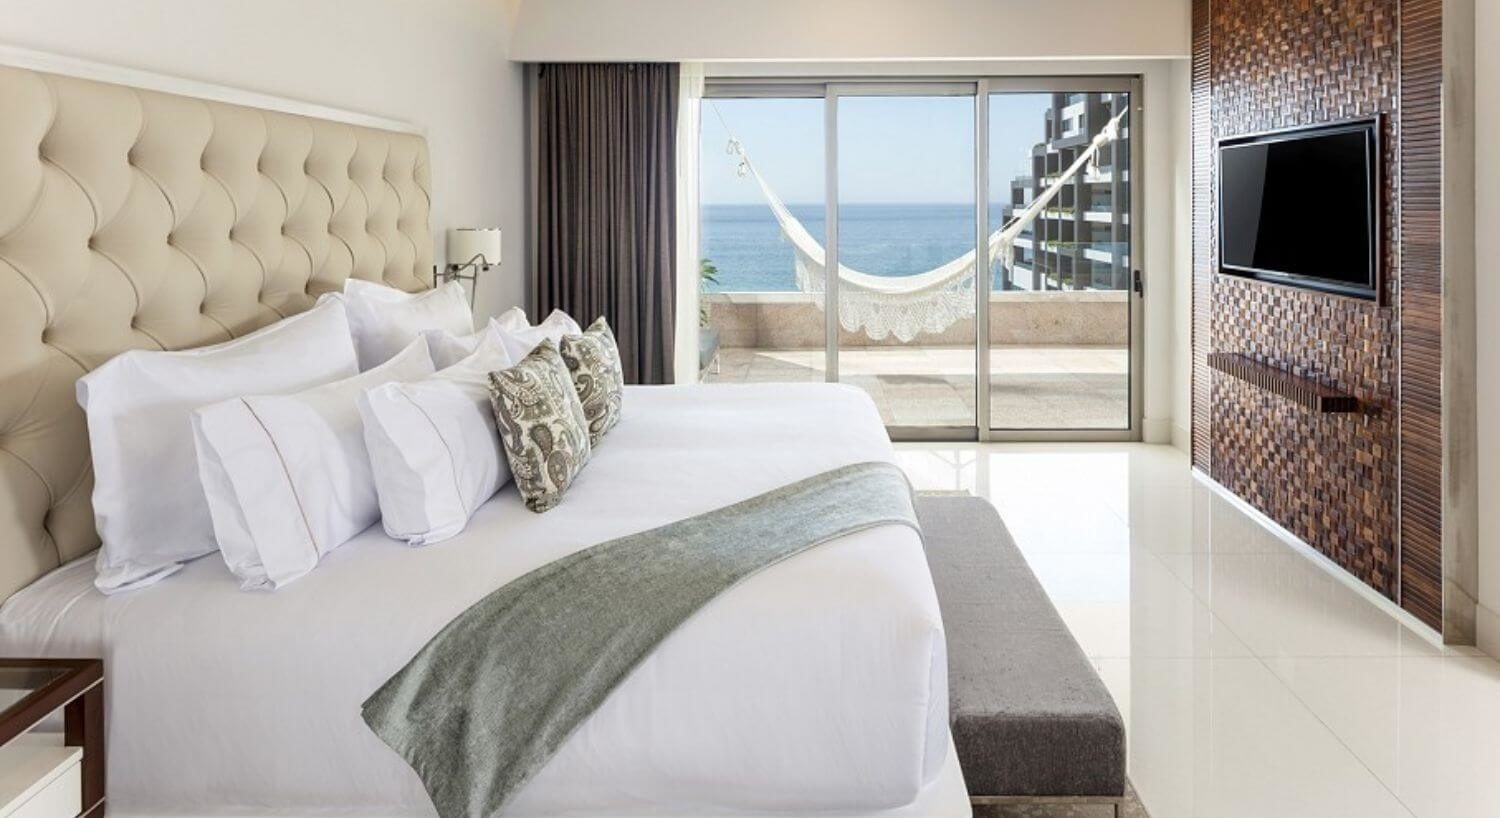 Bedroom with King bed, white bedding with sage accents, flat screen TV, and sliding doors out to a patio with hammock, ocean and resort views.